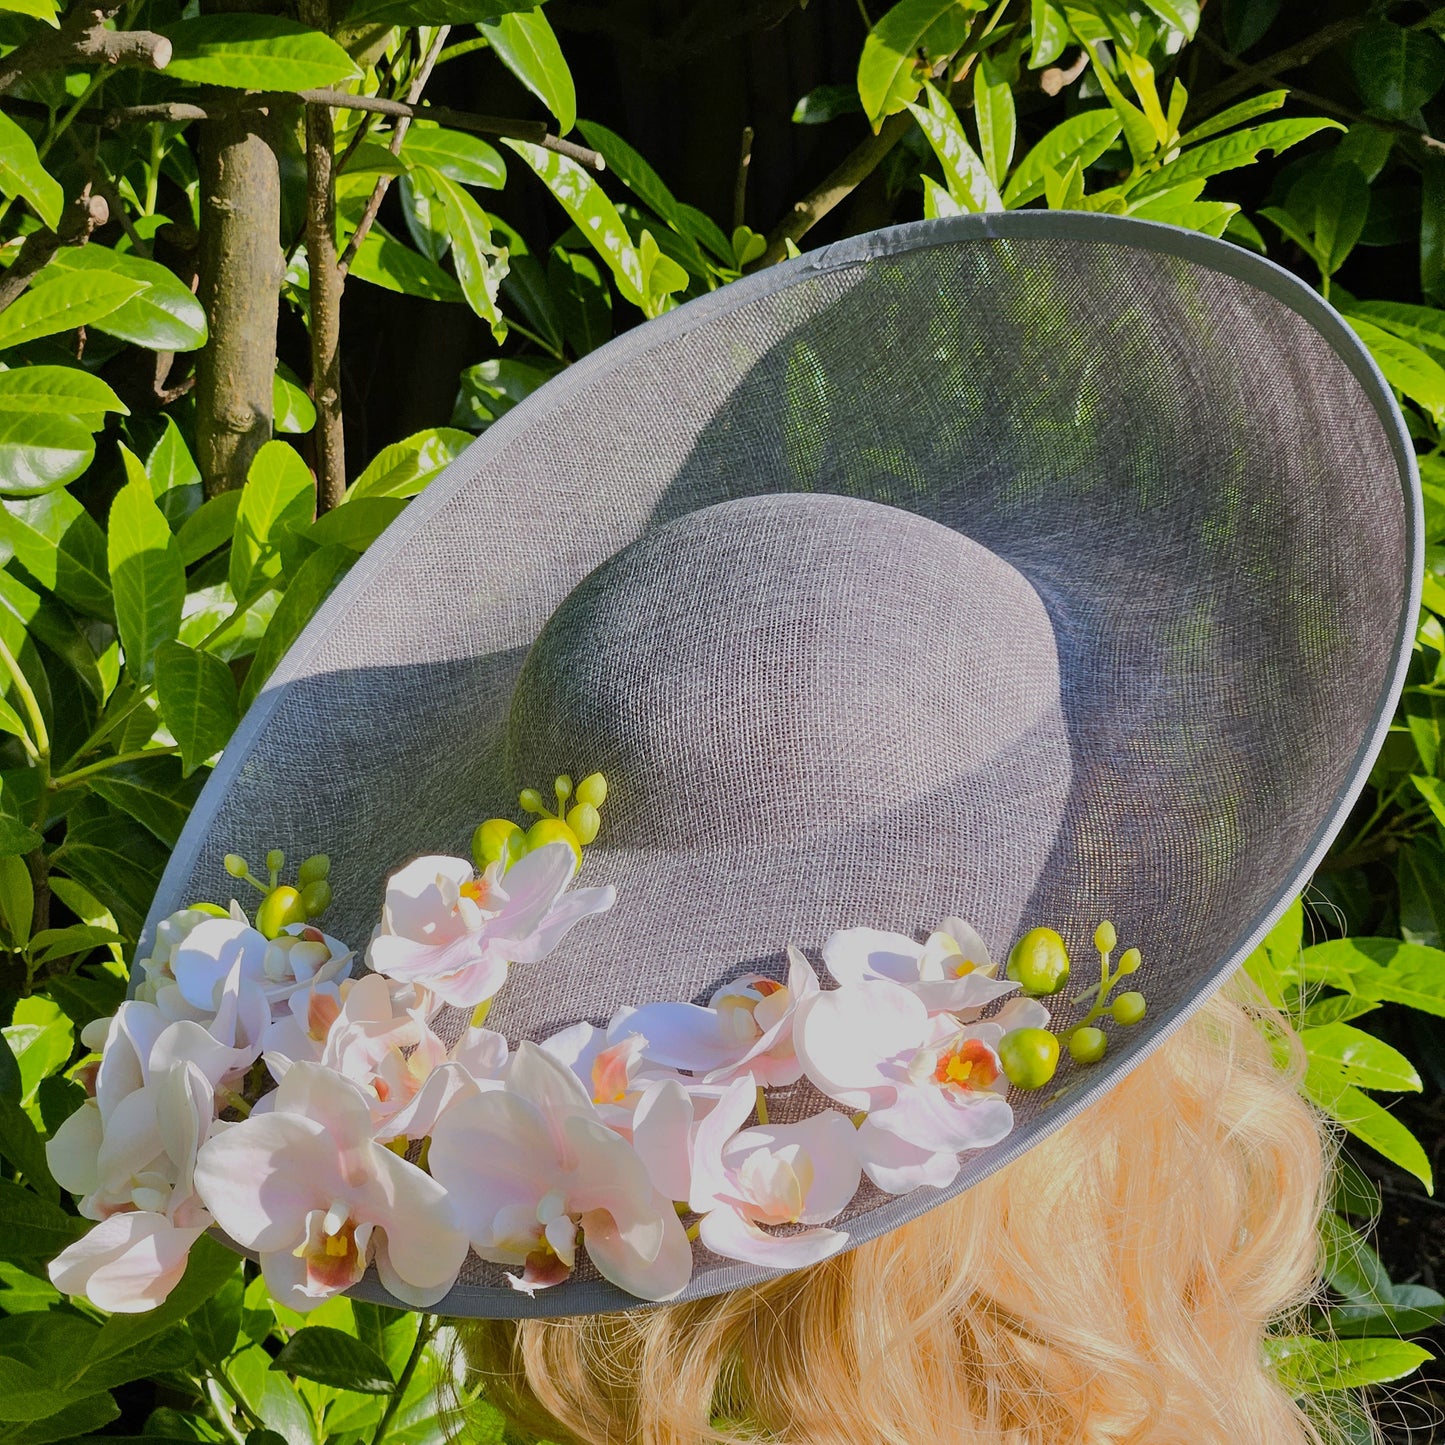 Extra Large Ascot Hat Grey White - Wedding Hats - Derby Hats - Church Hats for Ladies